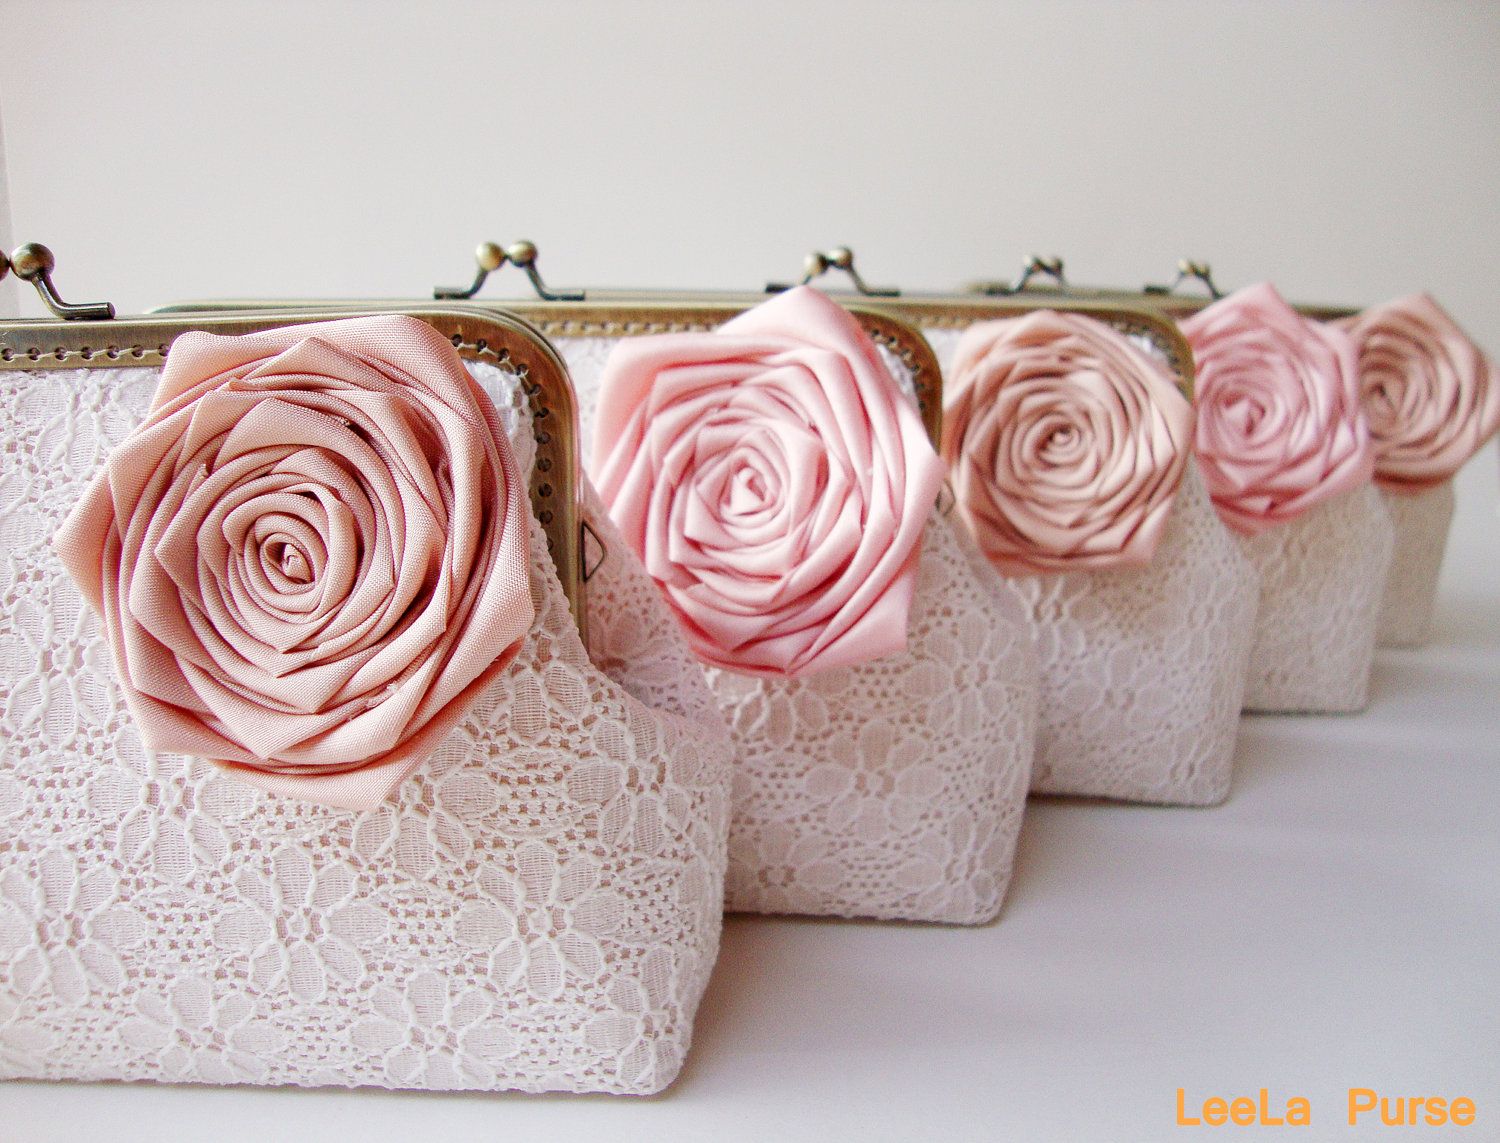 Bridesmaid Gifts - The Clutch Purse -   Great Personalized Bridesmaid Gifts